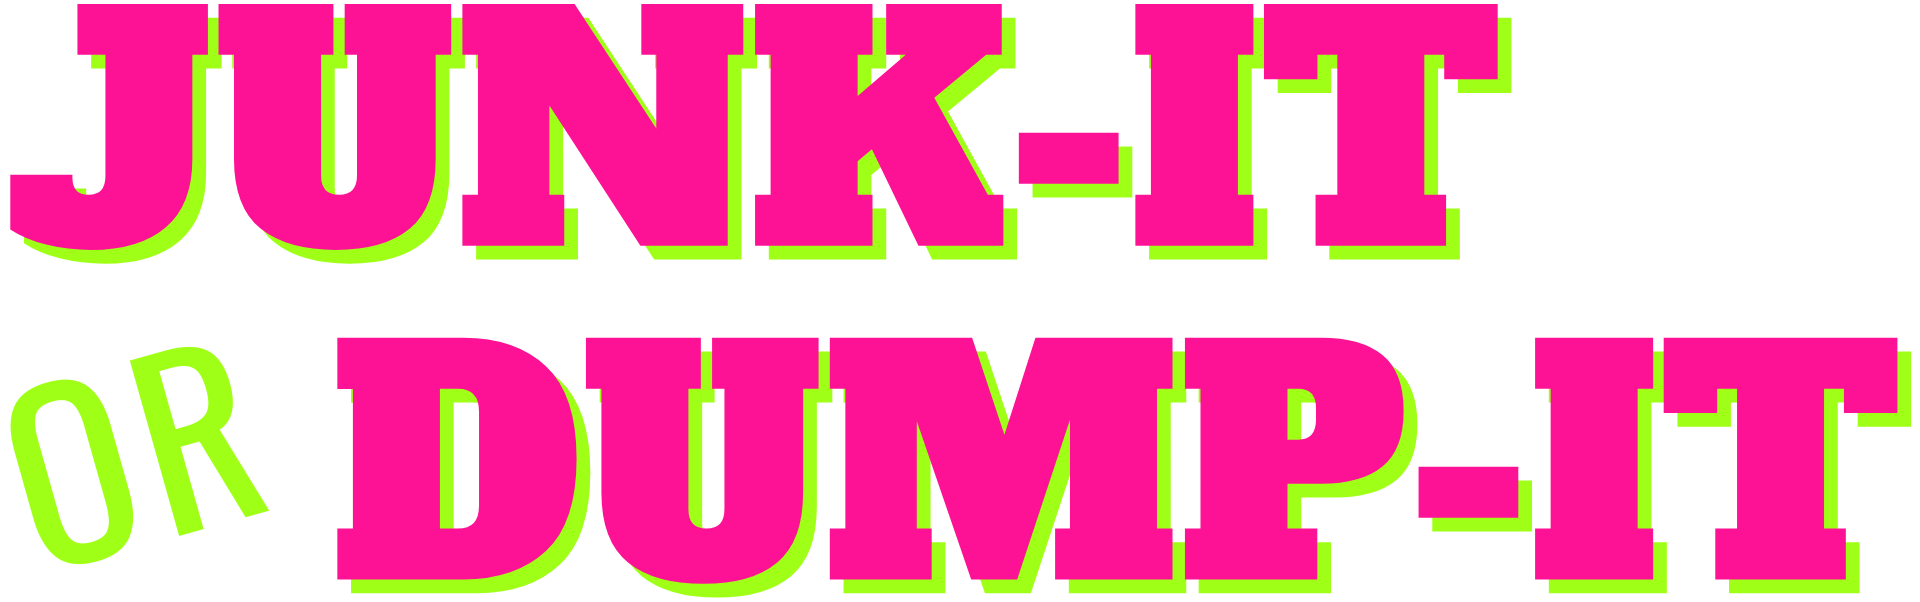 A pink and green sign that says junk-it or dump-it